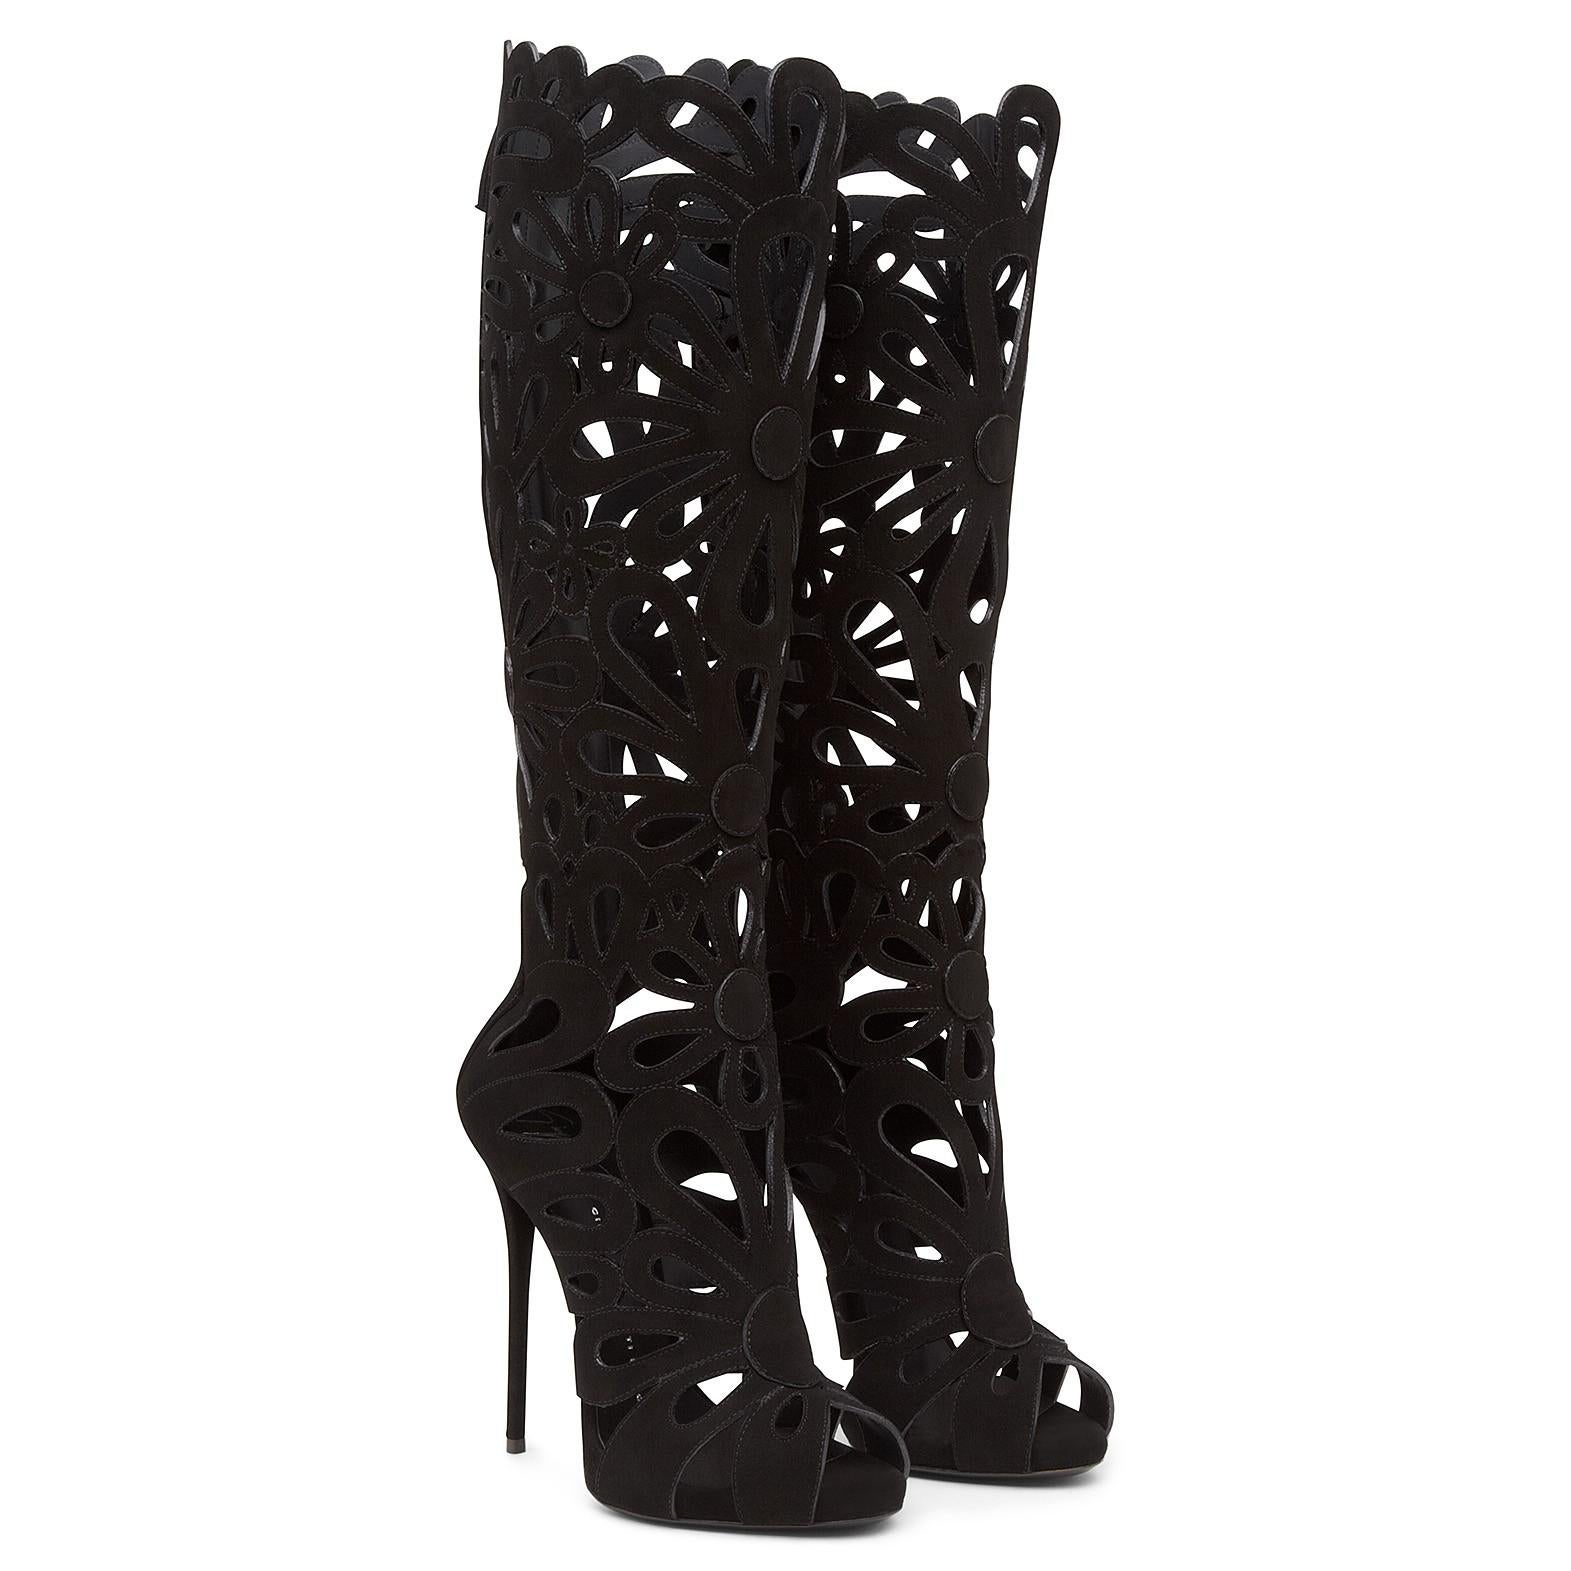 Giuseppe Zanotti NEW Black Suede Cut Out Evening Knee Heels Boots in Box 1